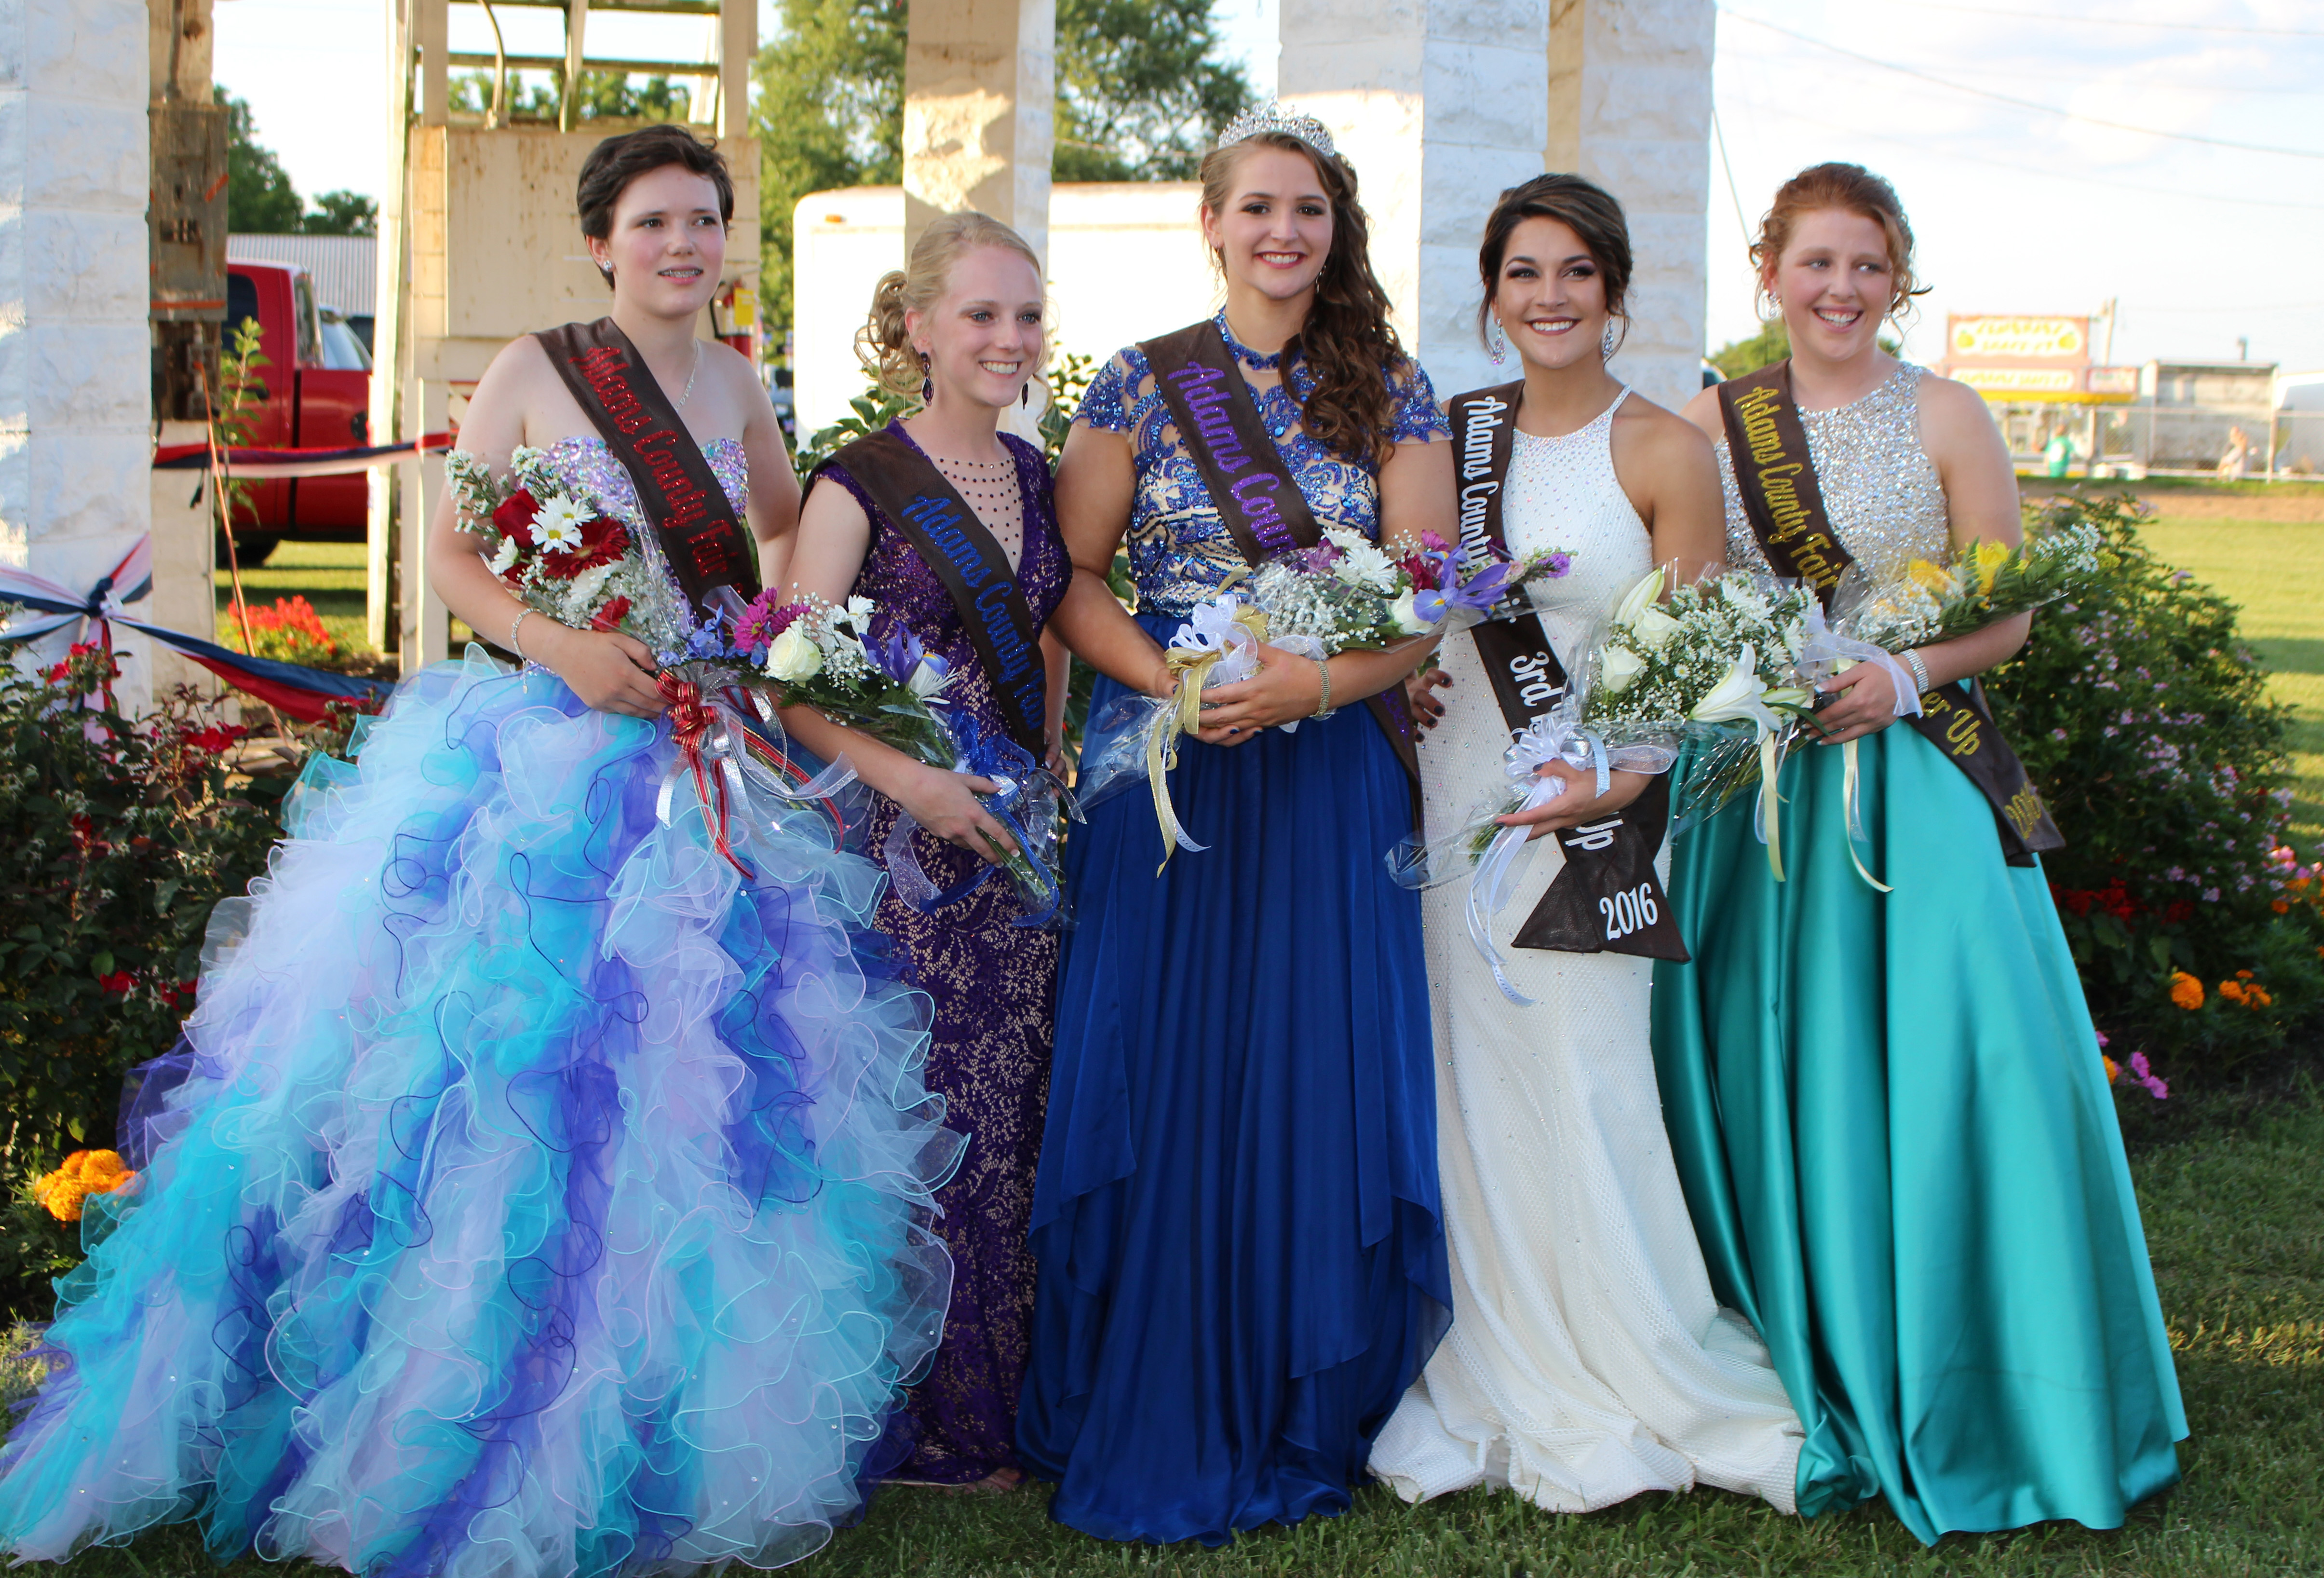 Pictured here are the 2016 Adams County Junior Fair Queen and her Court. From left, Molly Bauman, Second Runner-Up; Sarah McFarland, First Runner-Up; Queen Caitlin Young; McKayla Smith, Third Runner-Up; and Jordan Crum, Fourth Runner-Up.